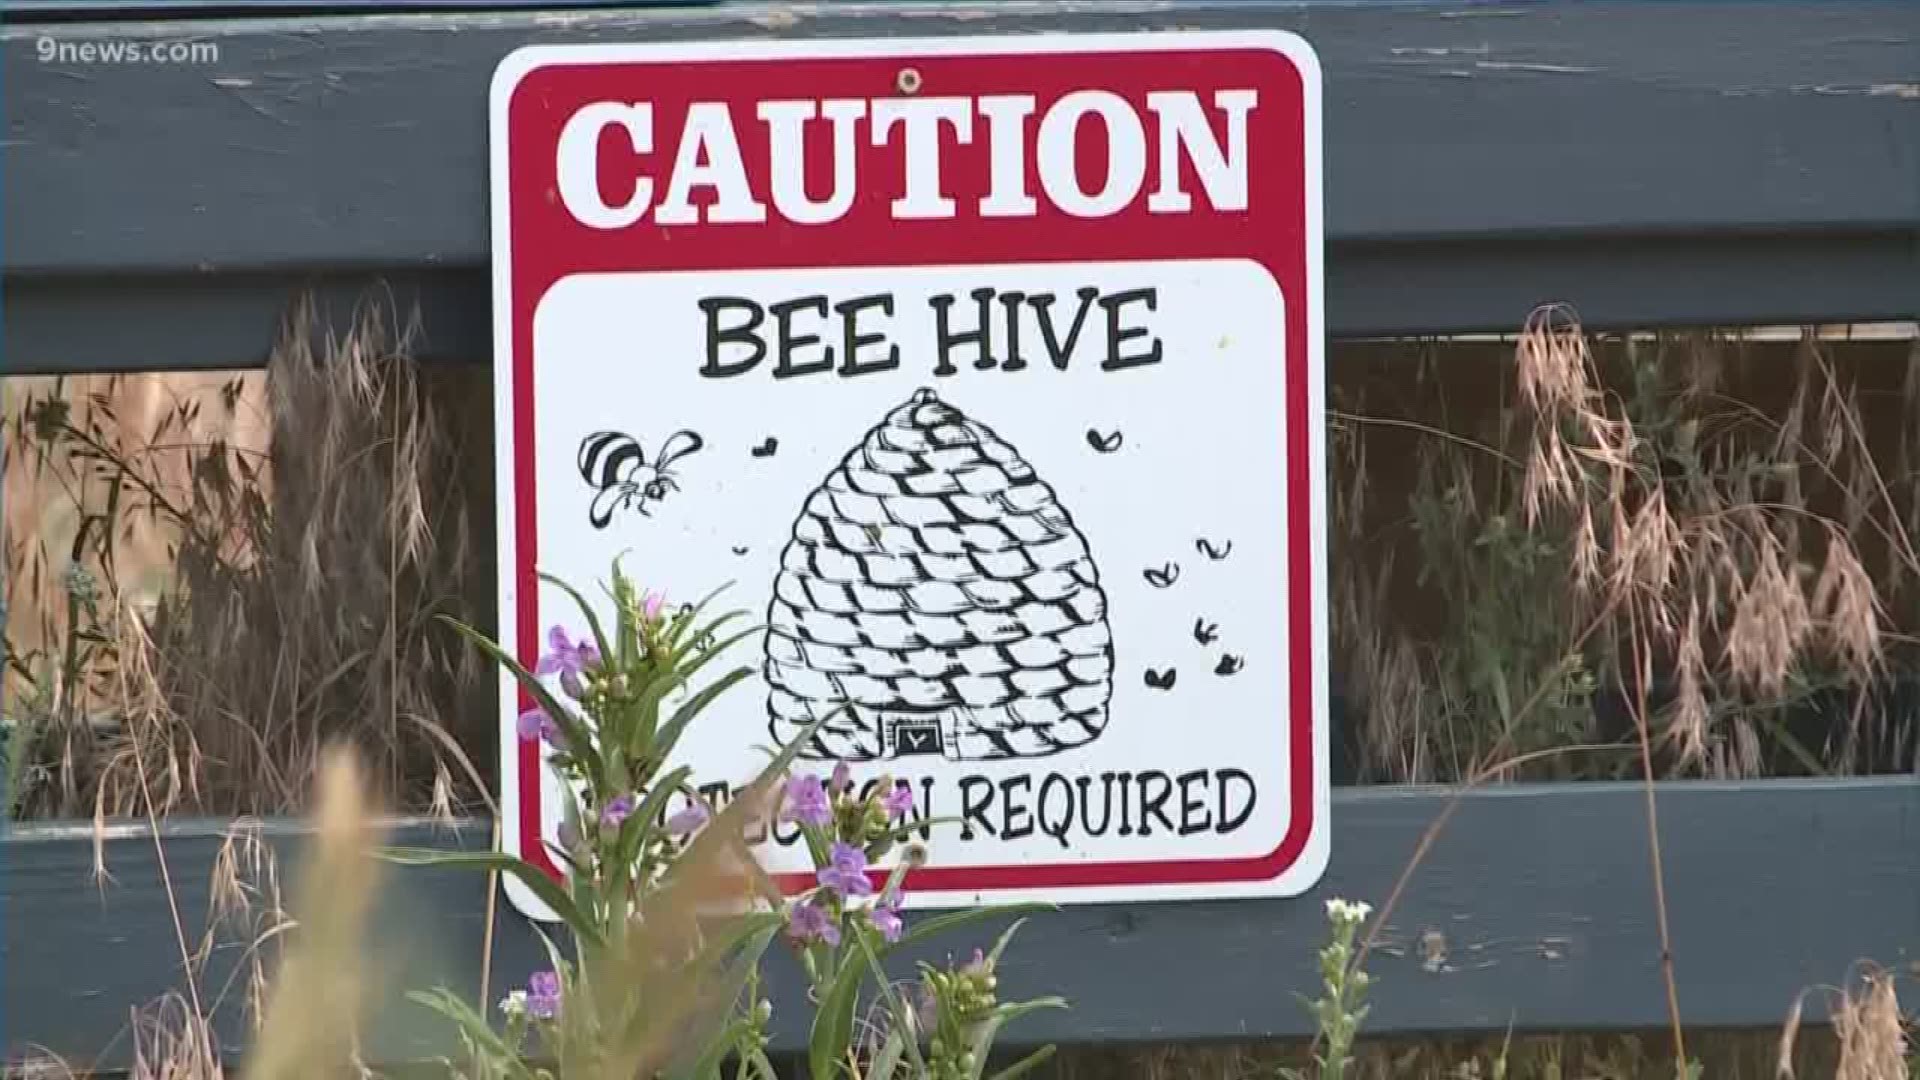 Rocky Mountain Bees in Colorado Springs said they were wiped out during that storm. and lost about 2/3 of their bees mainly from the persistent high winds that blew through.